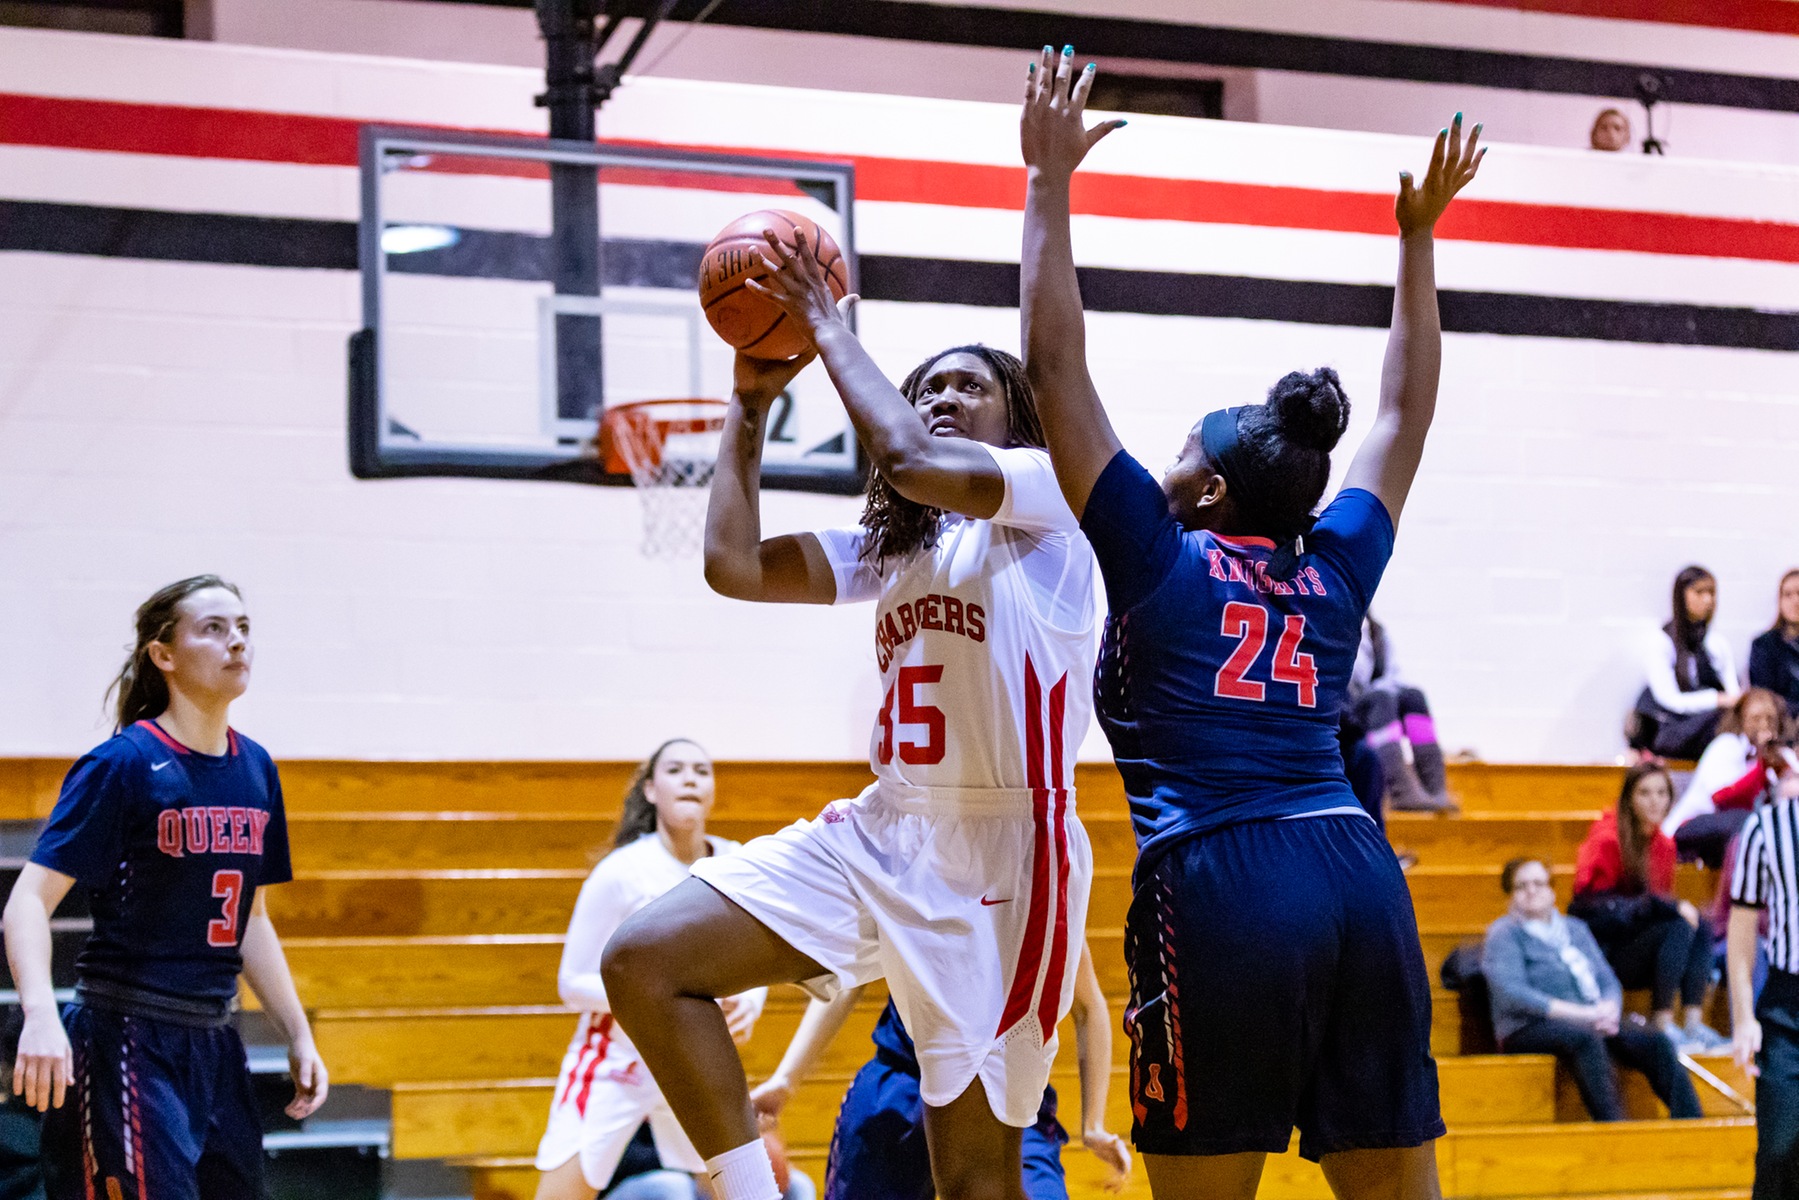 LADY CHARGERS FALL IN CACC CHAMPIONSHIP QUARTERFINALS